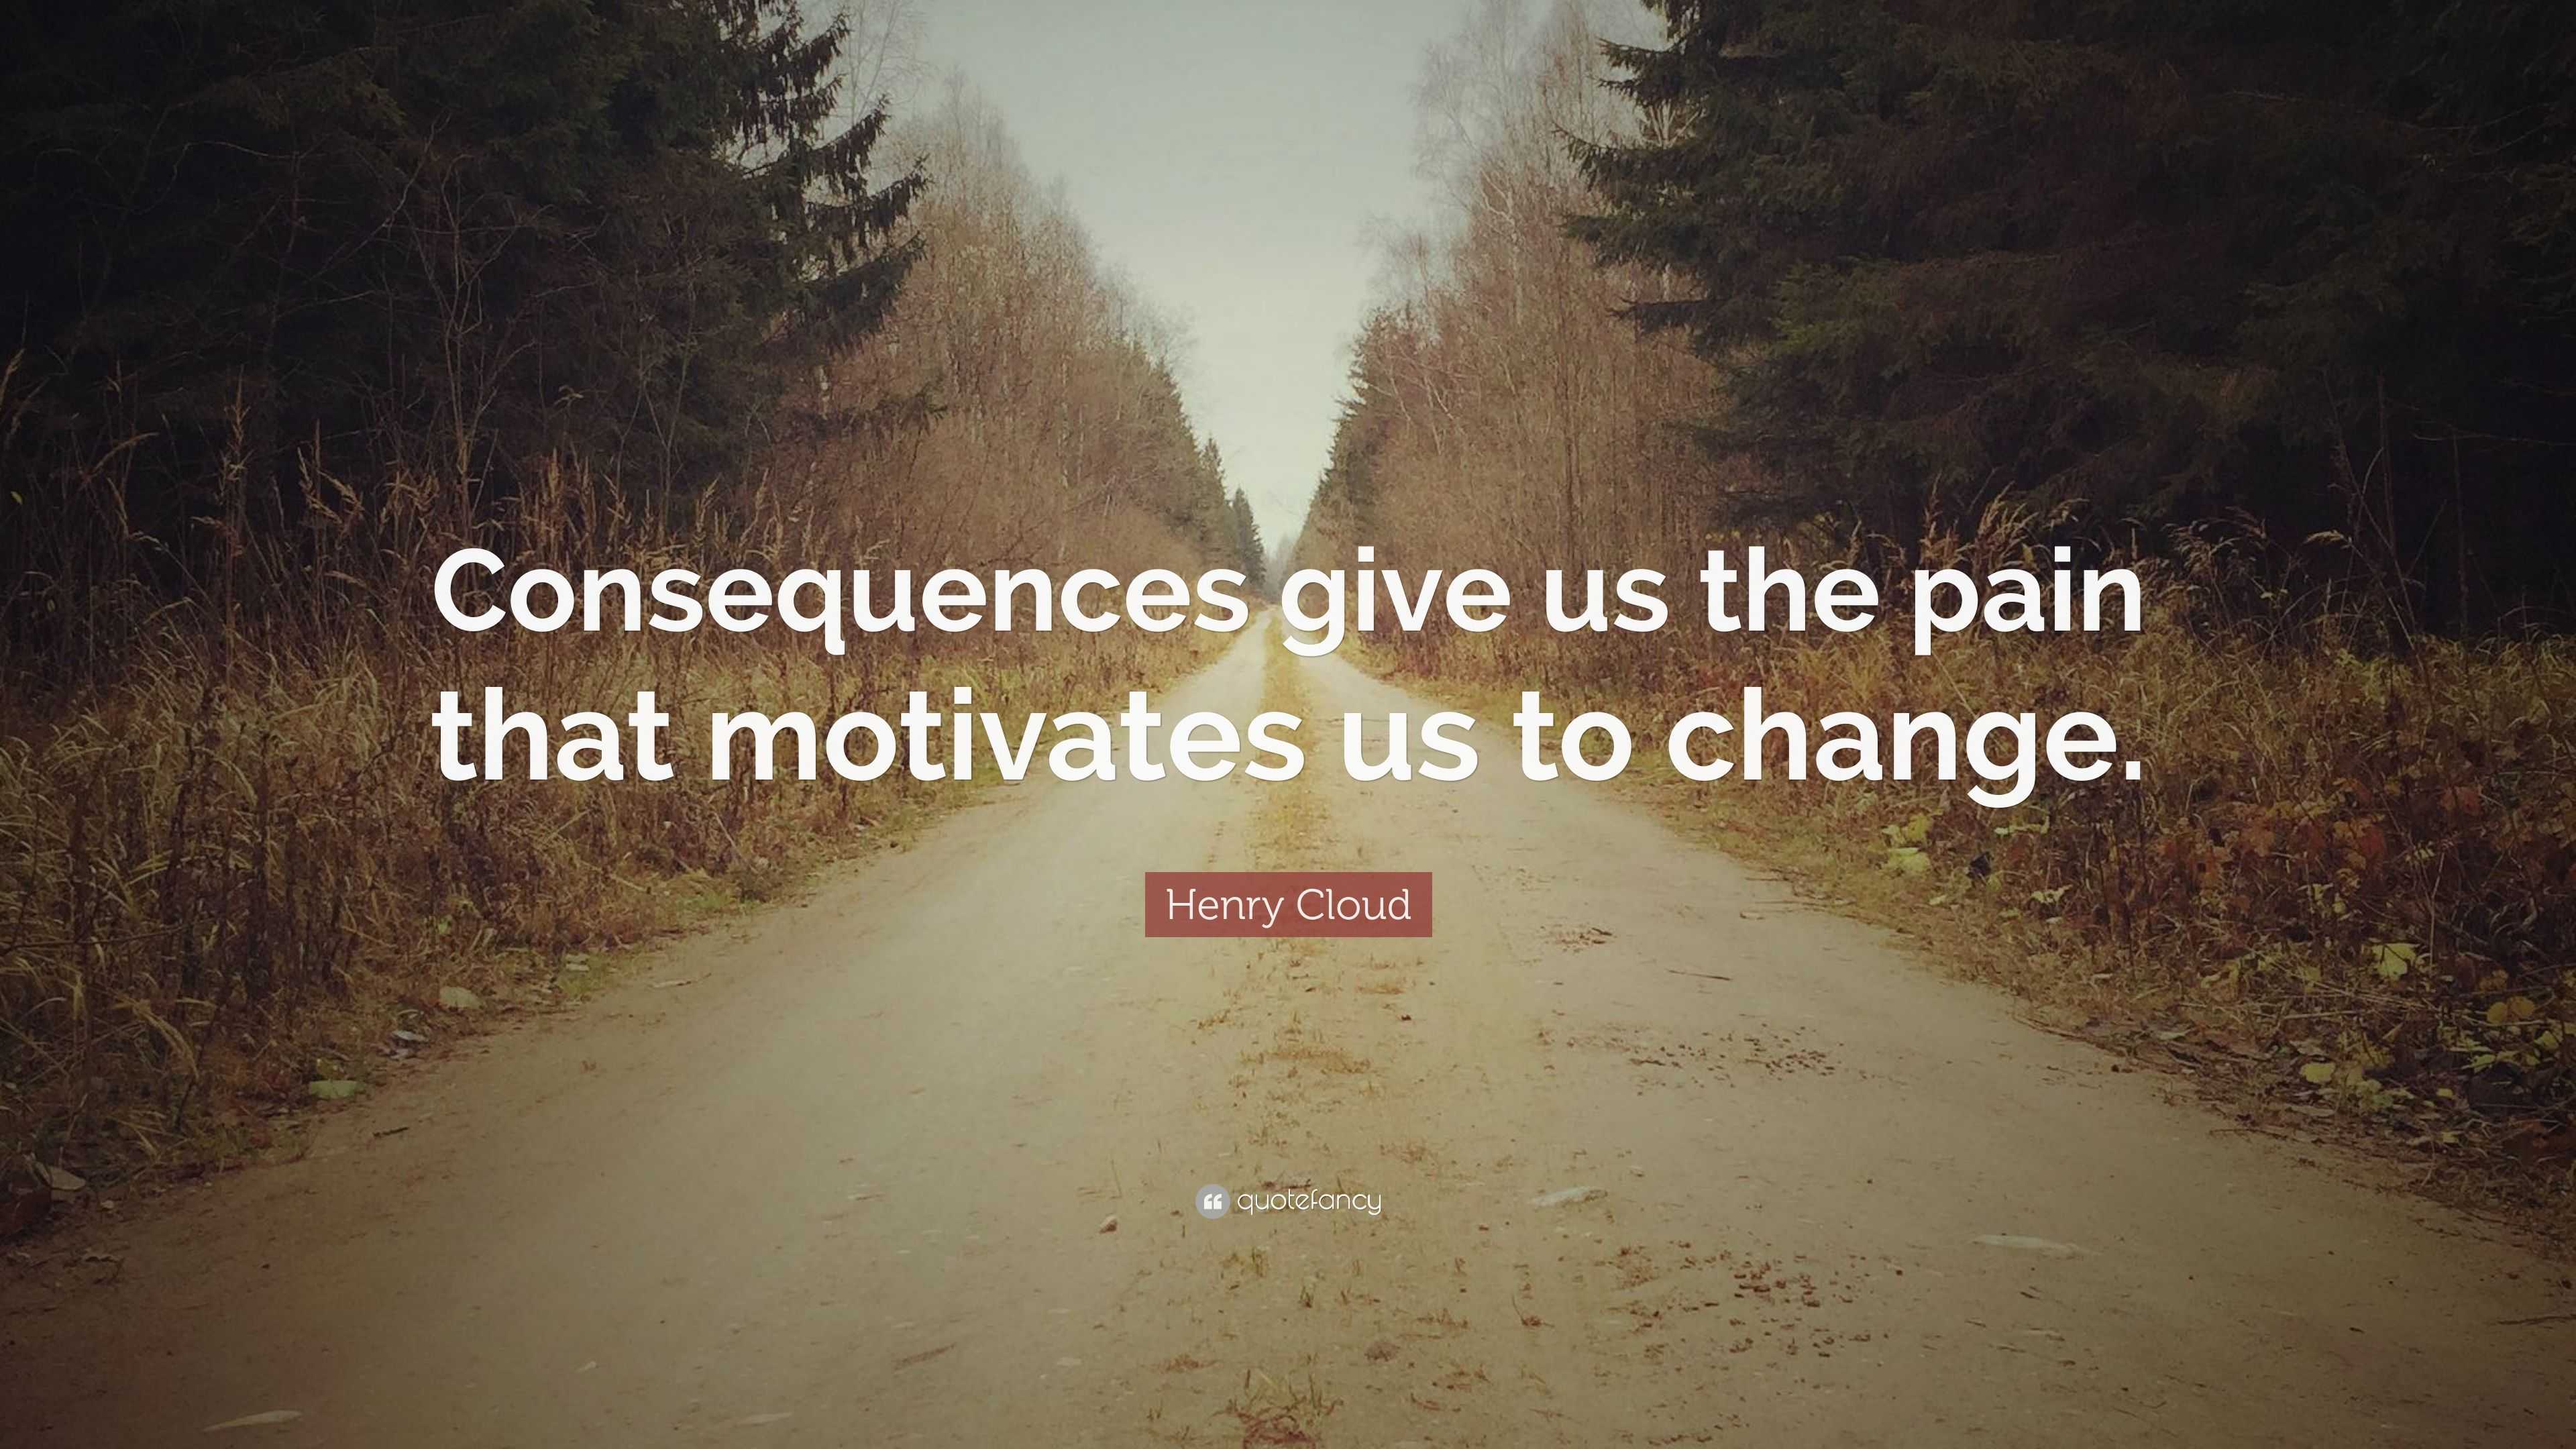 Henry Cloud Quote: “Consequences give us the pain that motivates us to ...